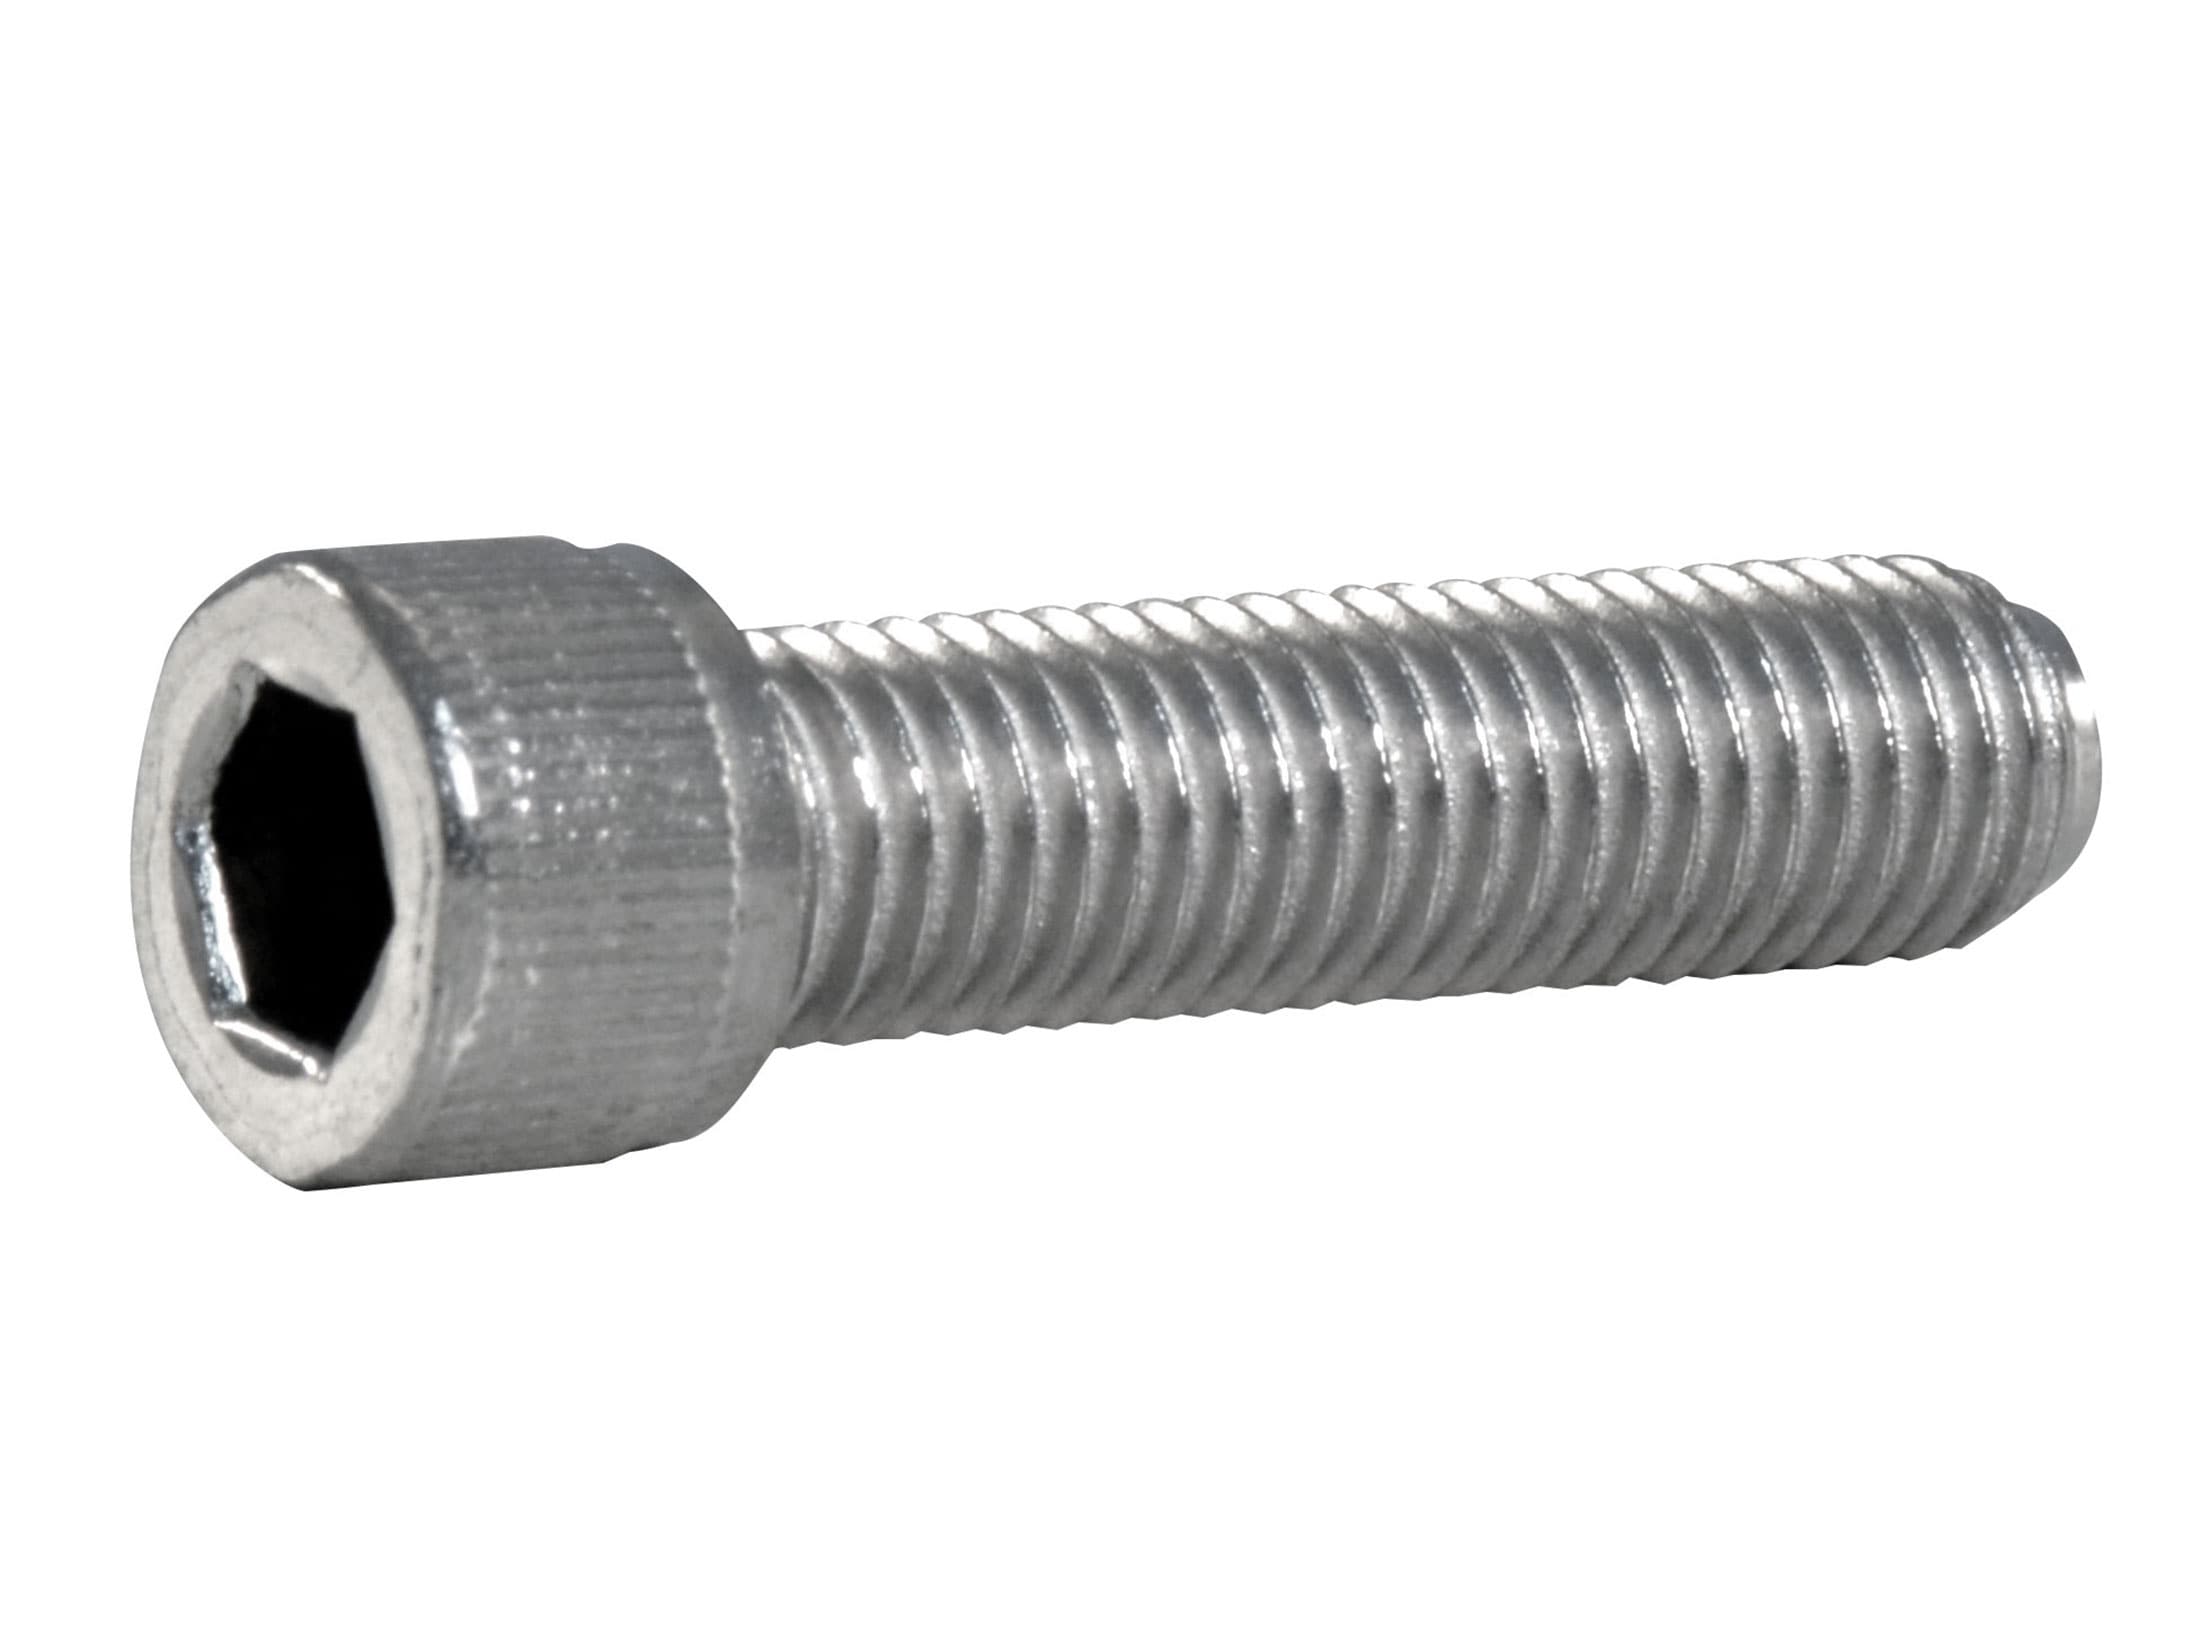 PISTOL GRIP SCREW STAINLESS with WRENCH socket cap 1" 223 5.56 308 7.62 300 